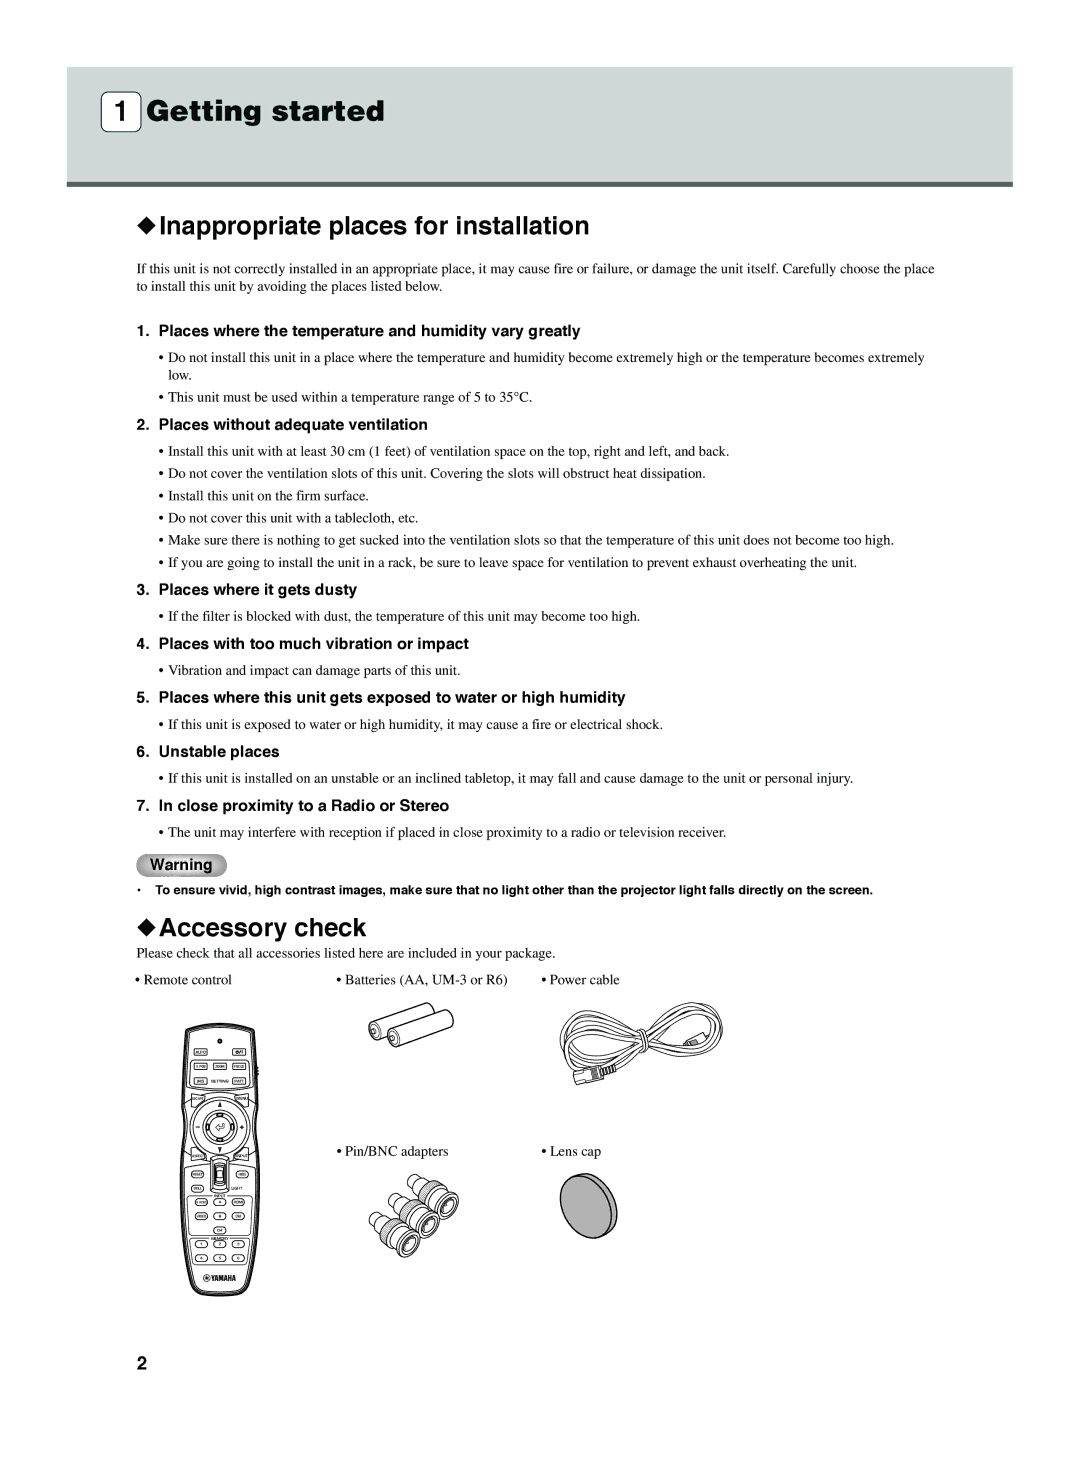 Yamaha DPX-1300 G manual Inappropriate places for installation, Accessory check 